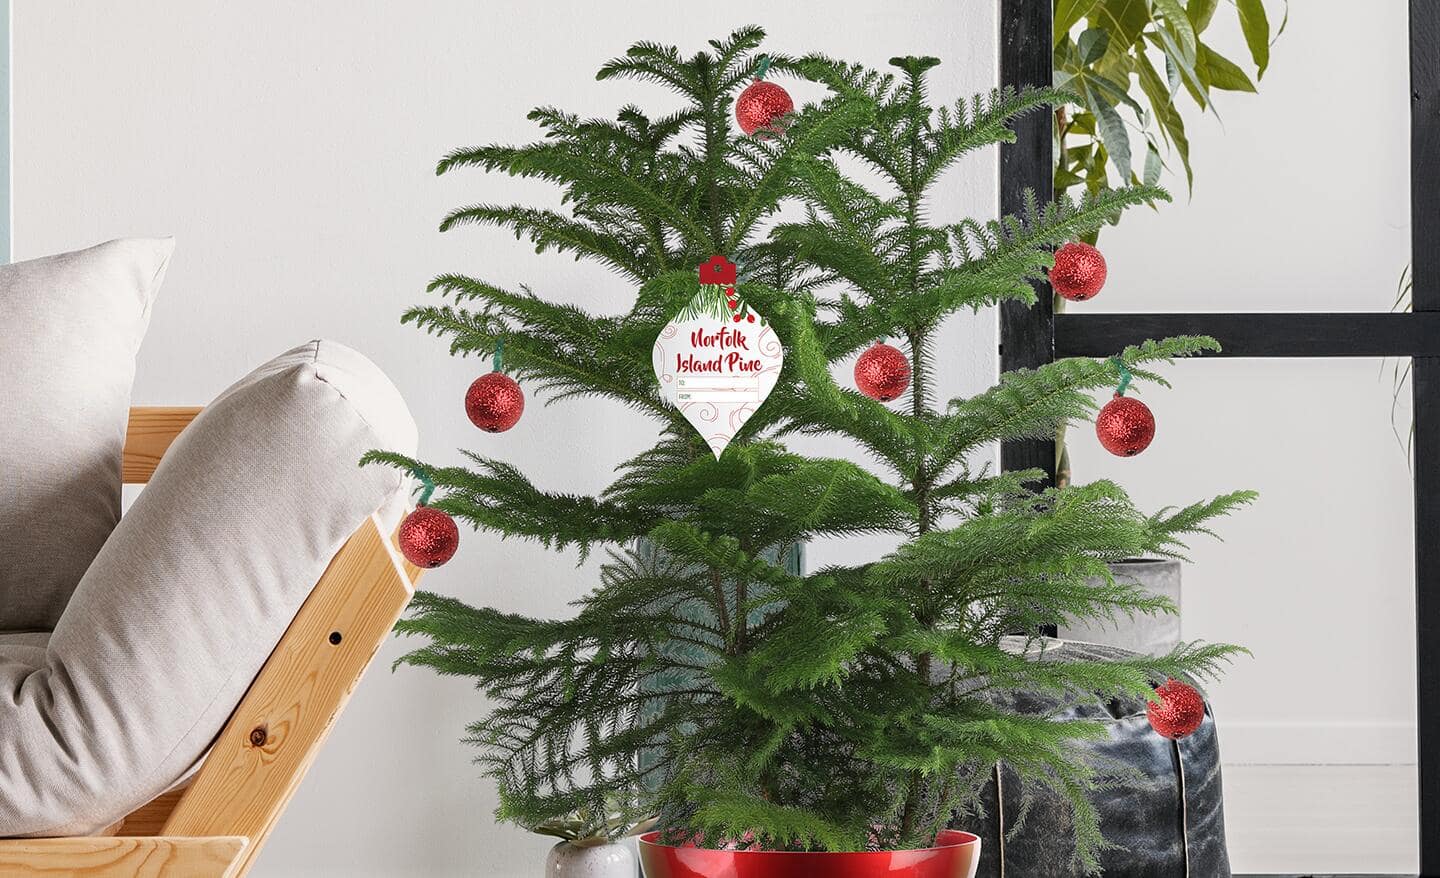 Norfolk Island Pine decorated with Christmas ornaments